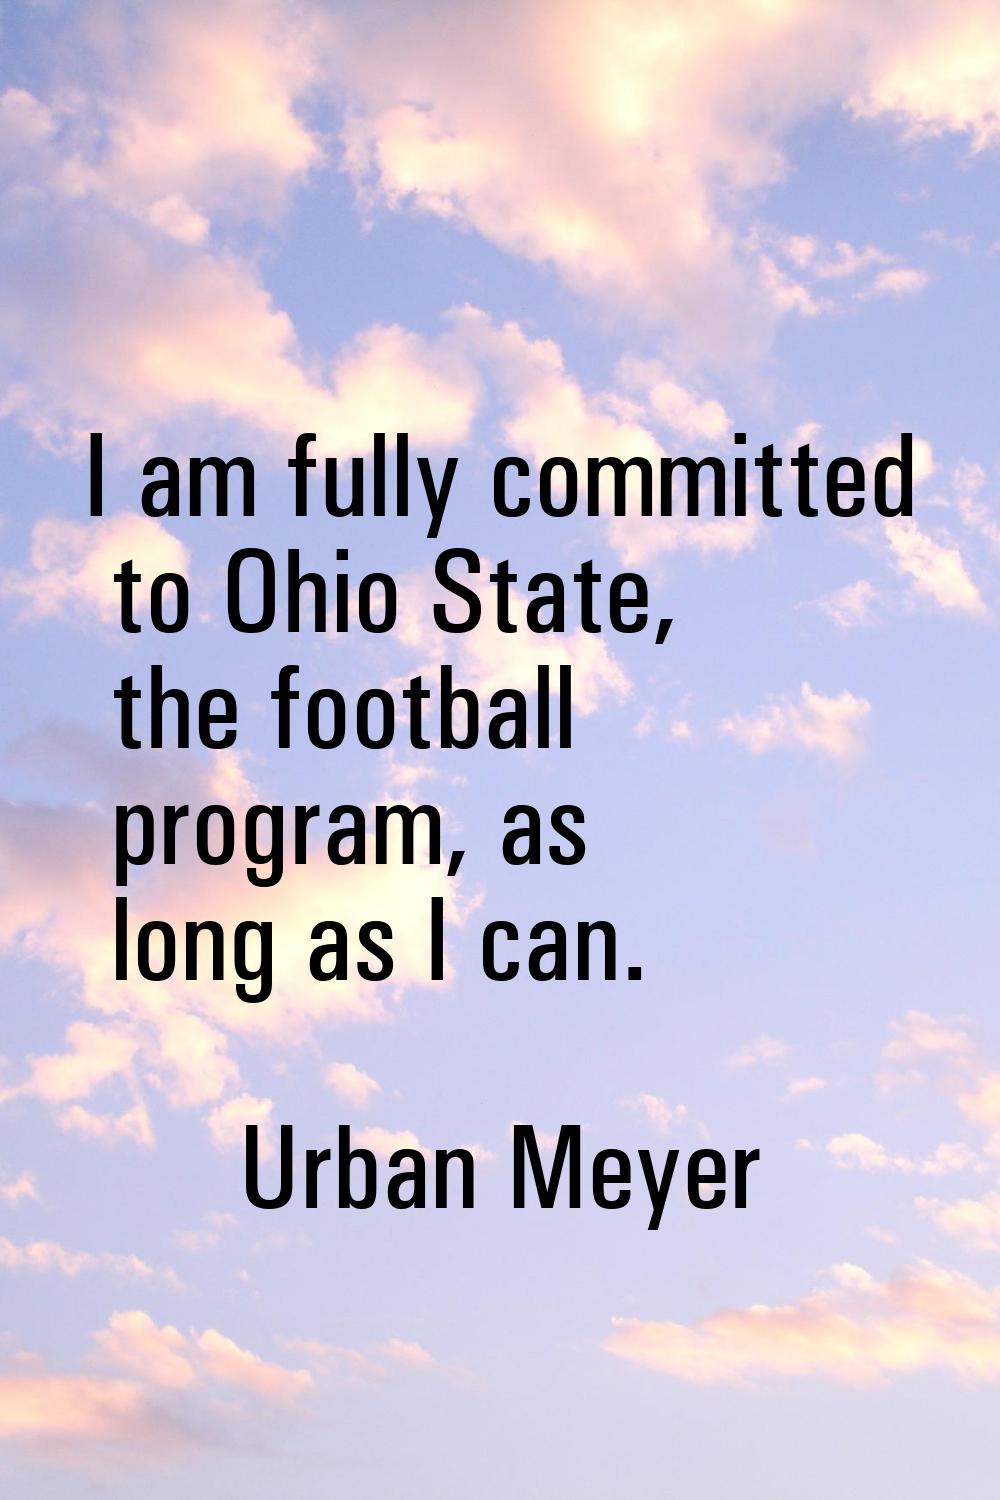 I am fully committed to Ohio State, the football program, as long as I can.